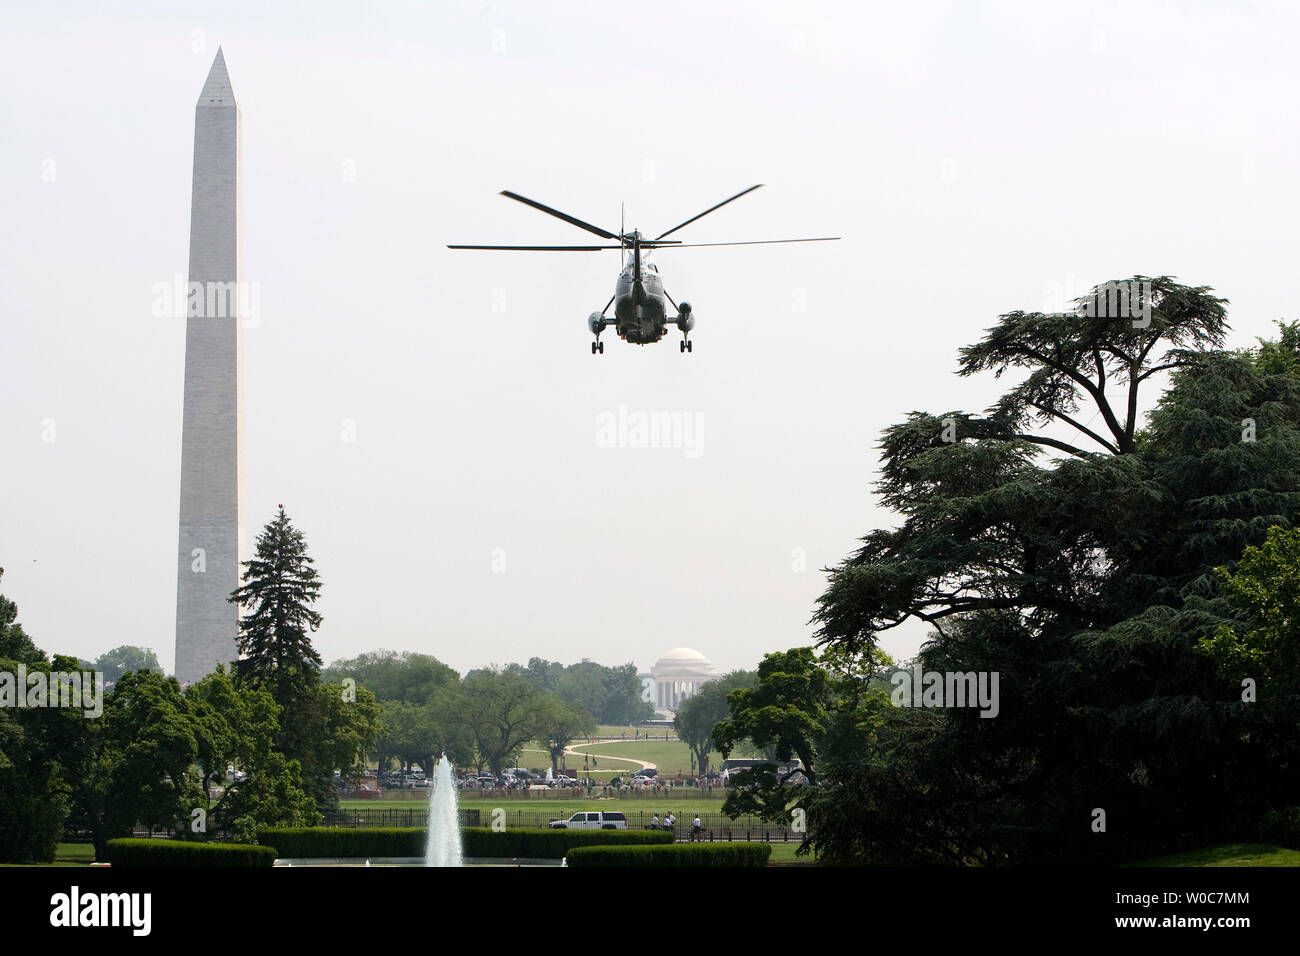 U.S. President George W. Bush, on board Marine One, departs from the South Lawn of the White House in Washington on June 6, 2008. President Bush is going to Camp David for the weekend. (UPI Photo/Patrick D. McDermott) Stock Photo